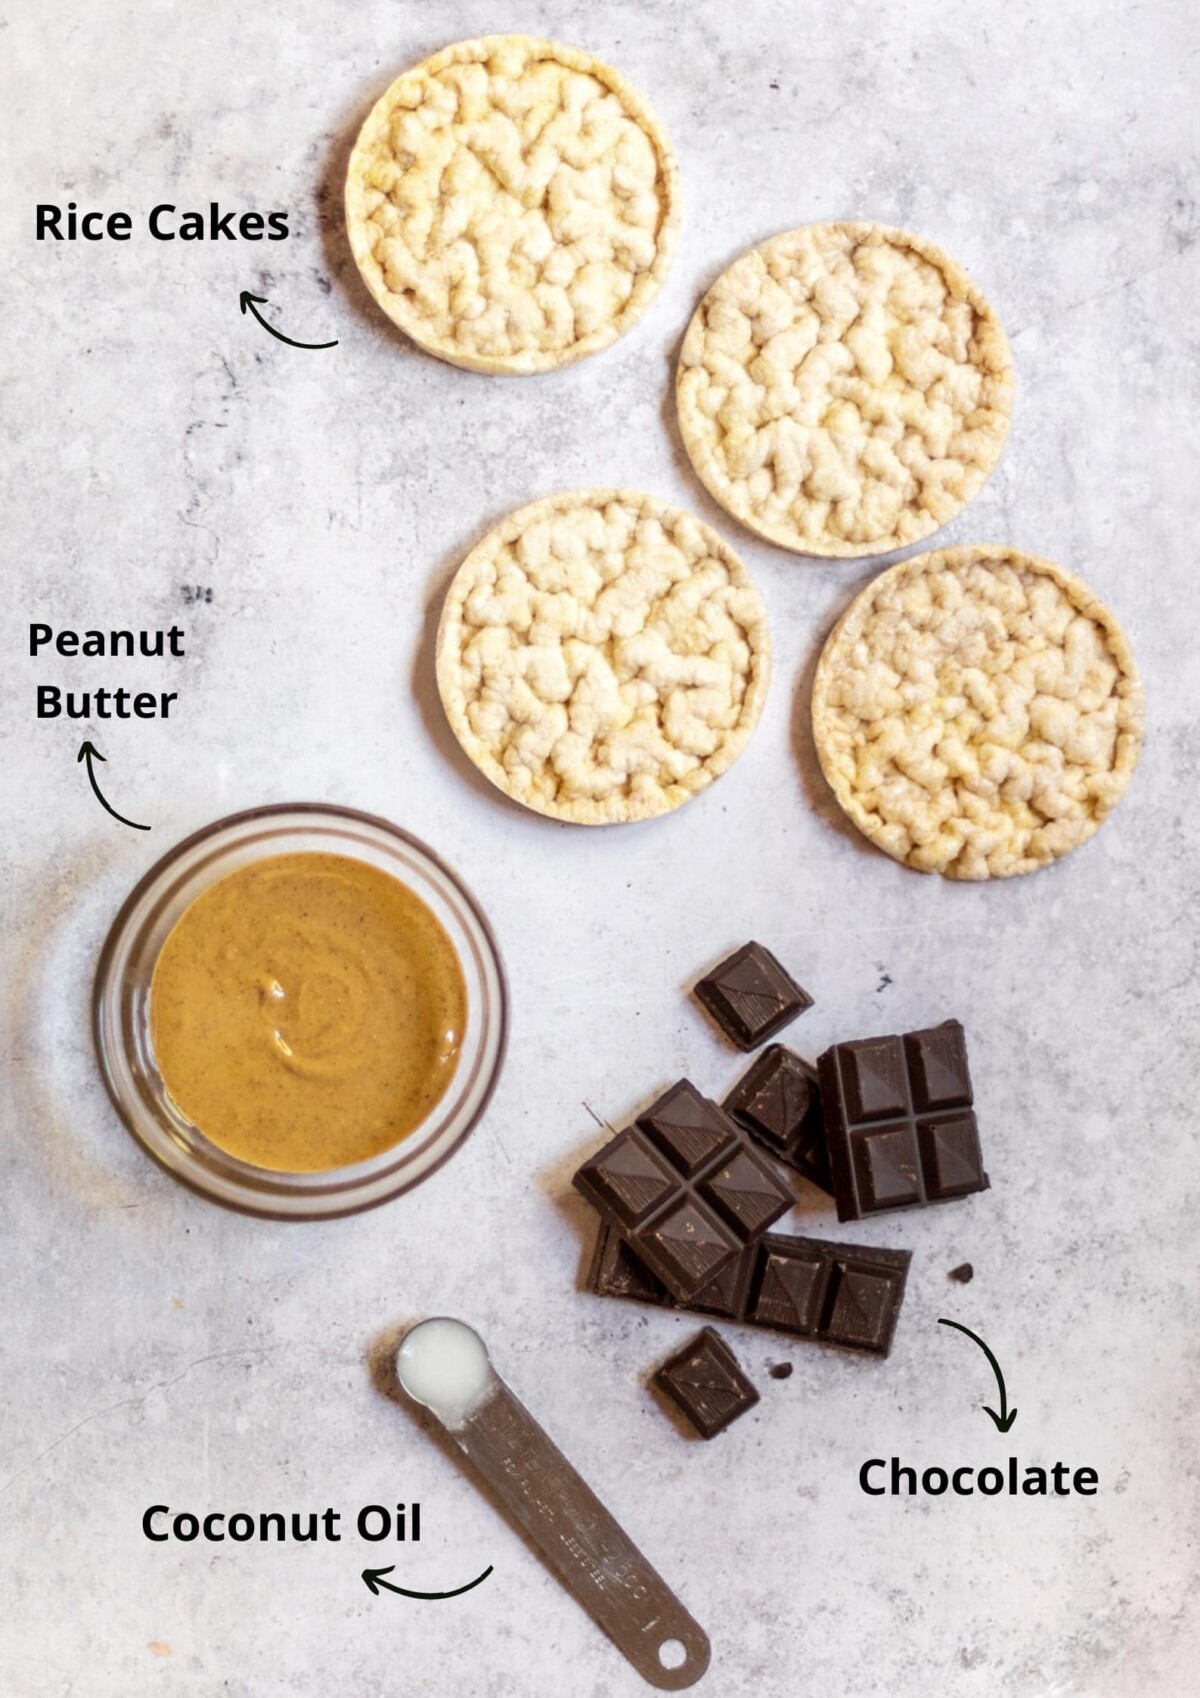 The rice cakes, peanut butter, chocolate and coconut oil laid out on a light background and labelled.